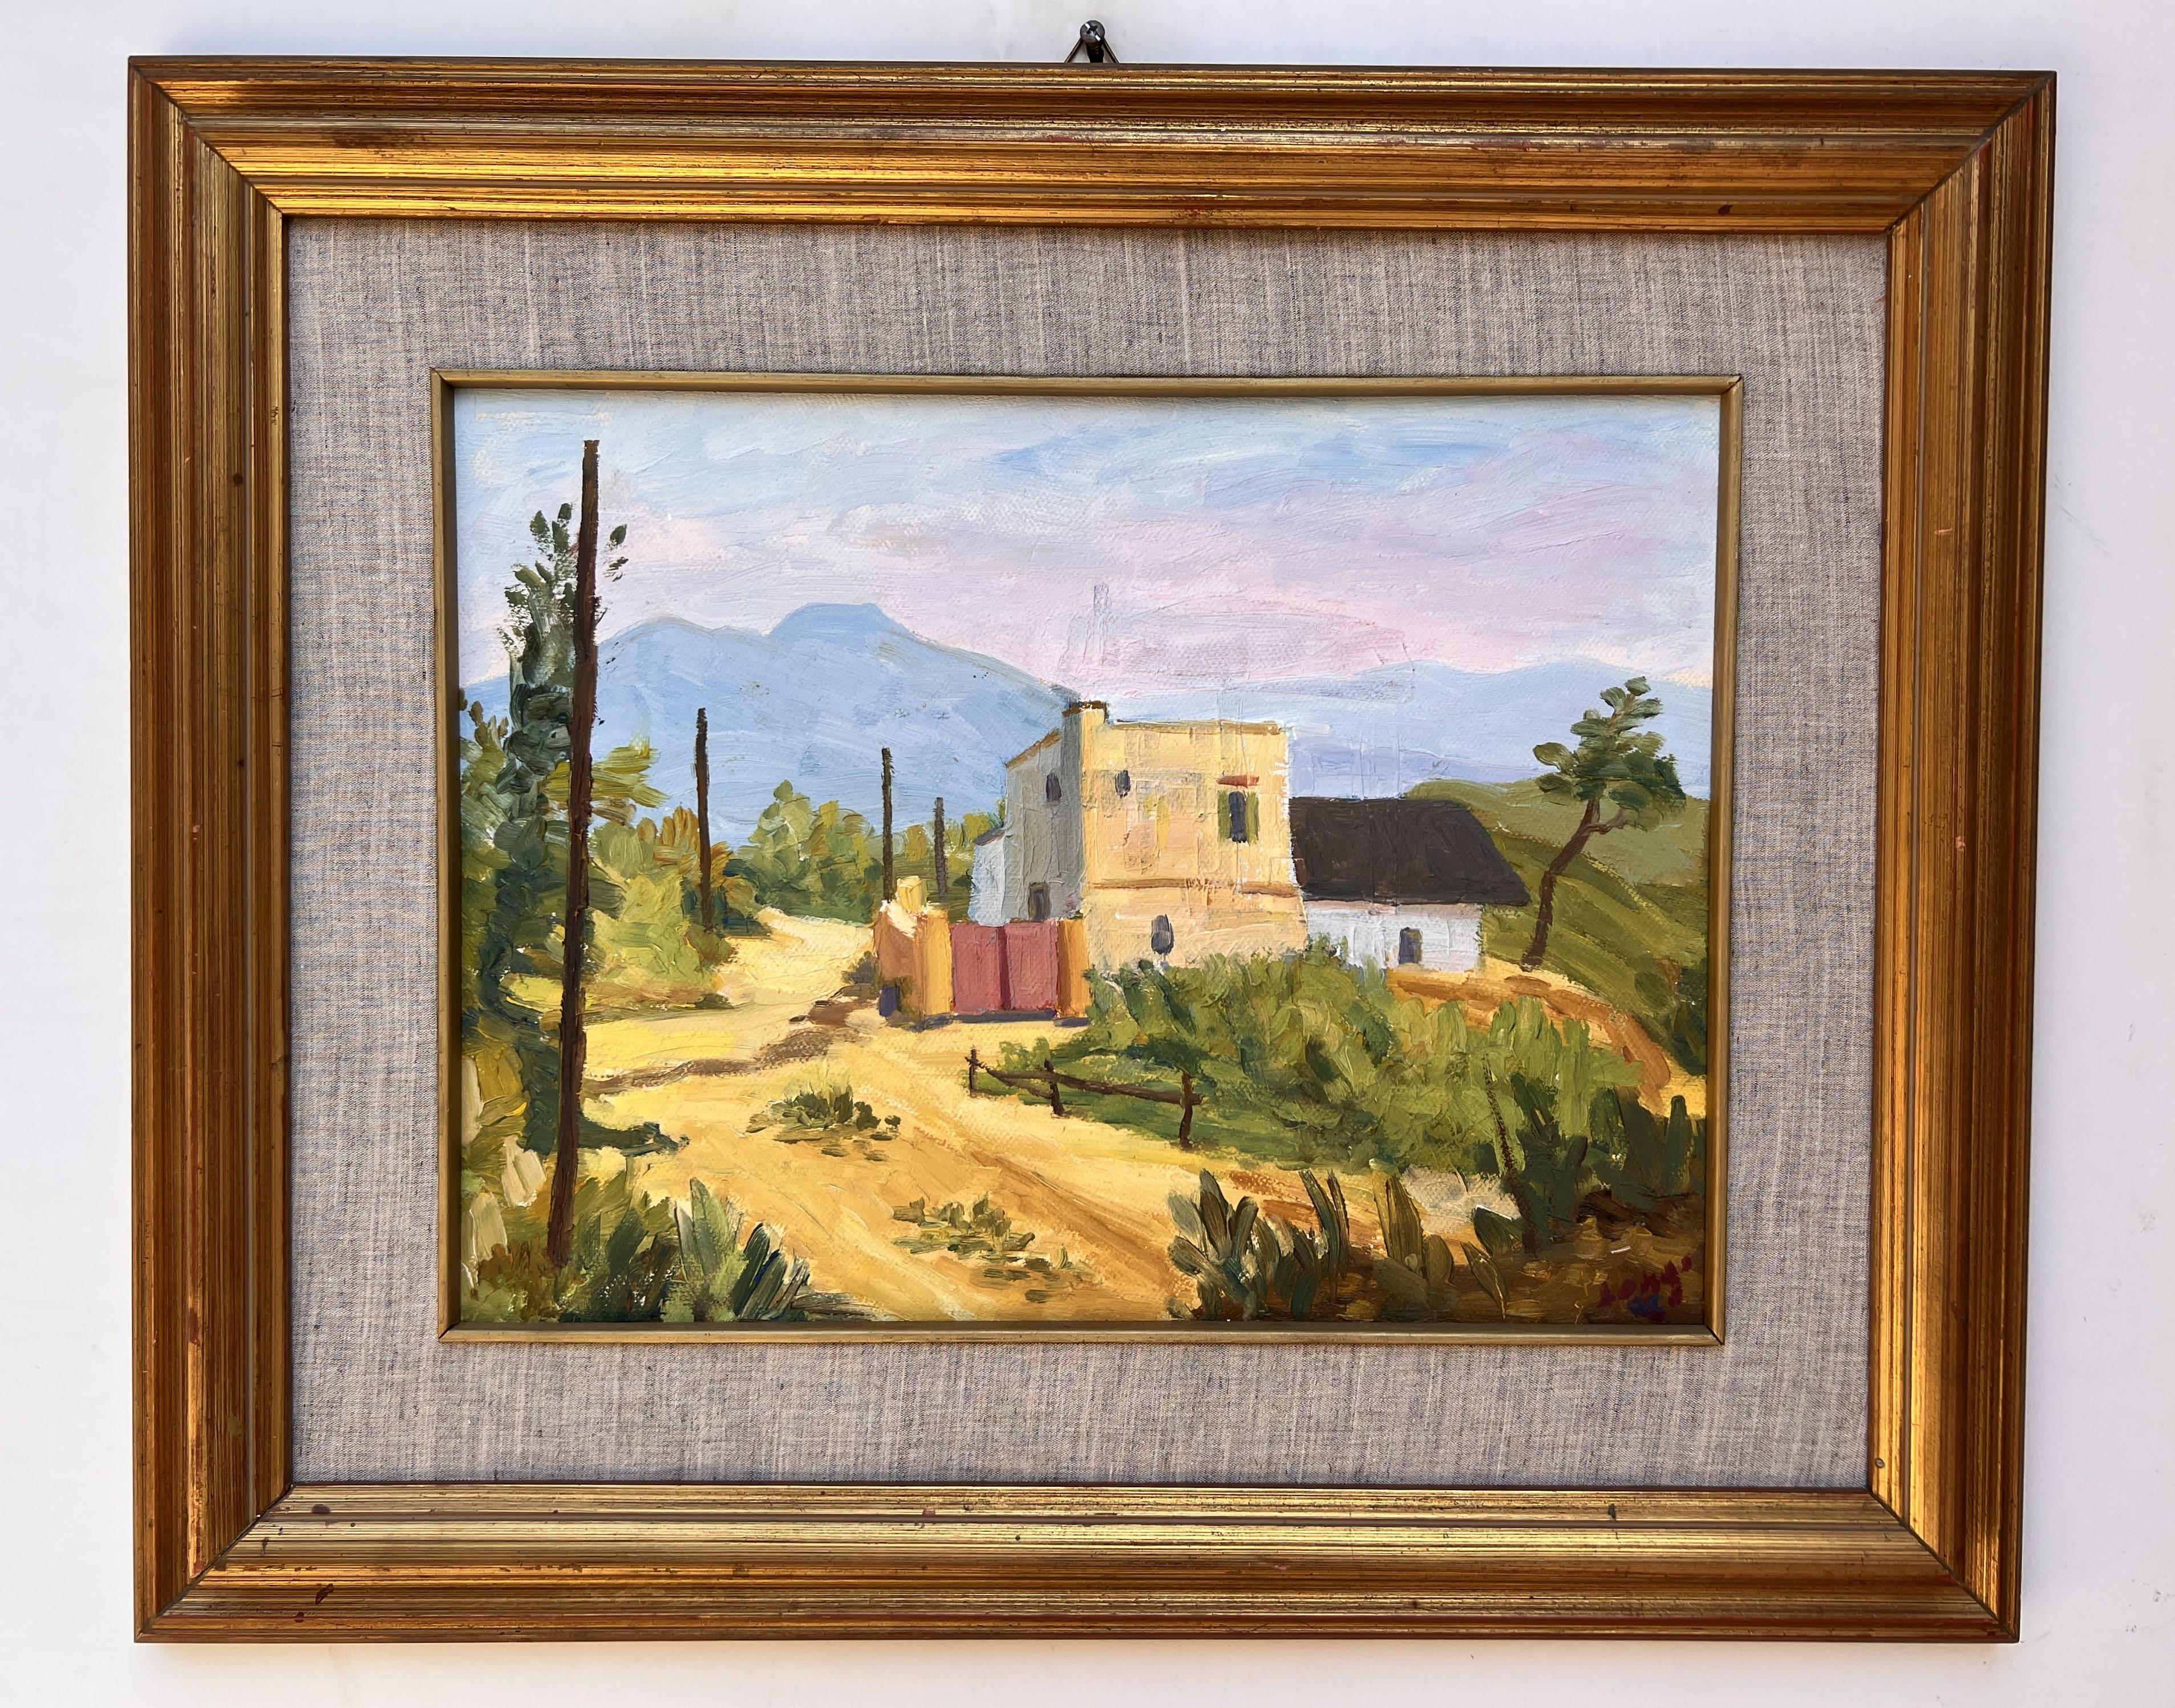 This is an original oil painting on canvas by  HC Longo, depicting a lovely landscape with the house. Italian School. 

Nicely framed. The painting and the frame are in good condition.

Signed in the lower-right corner. 

Dimensions (frame): 23” W x